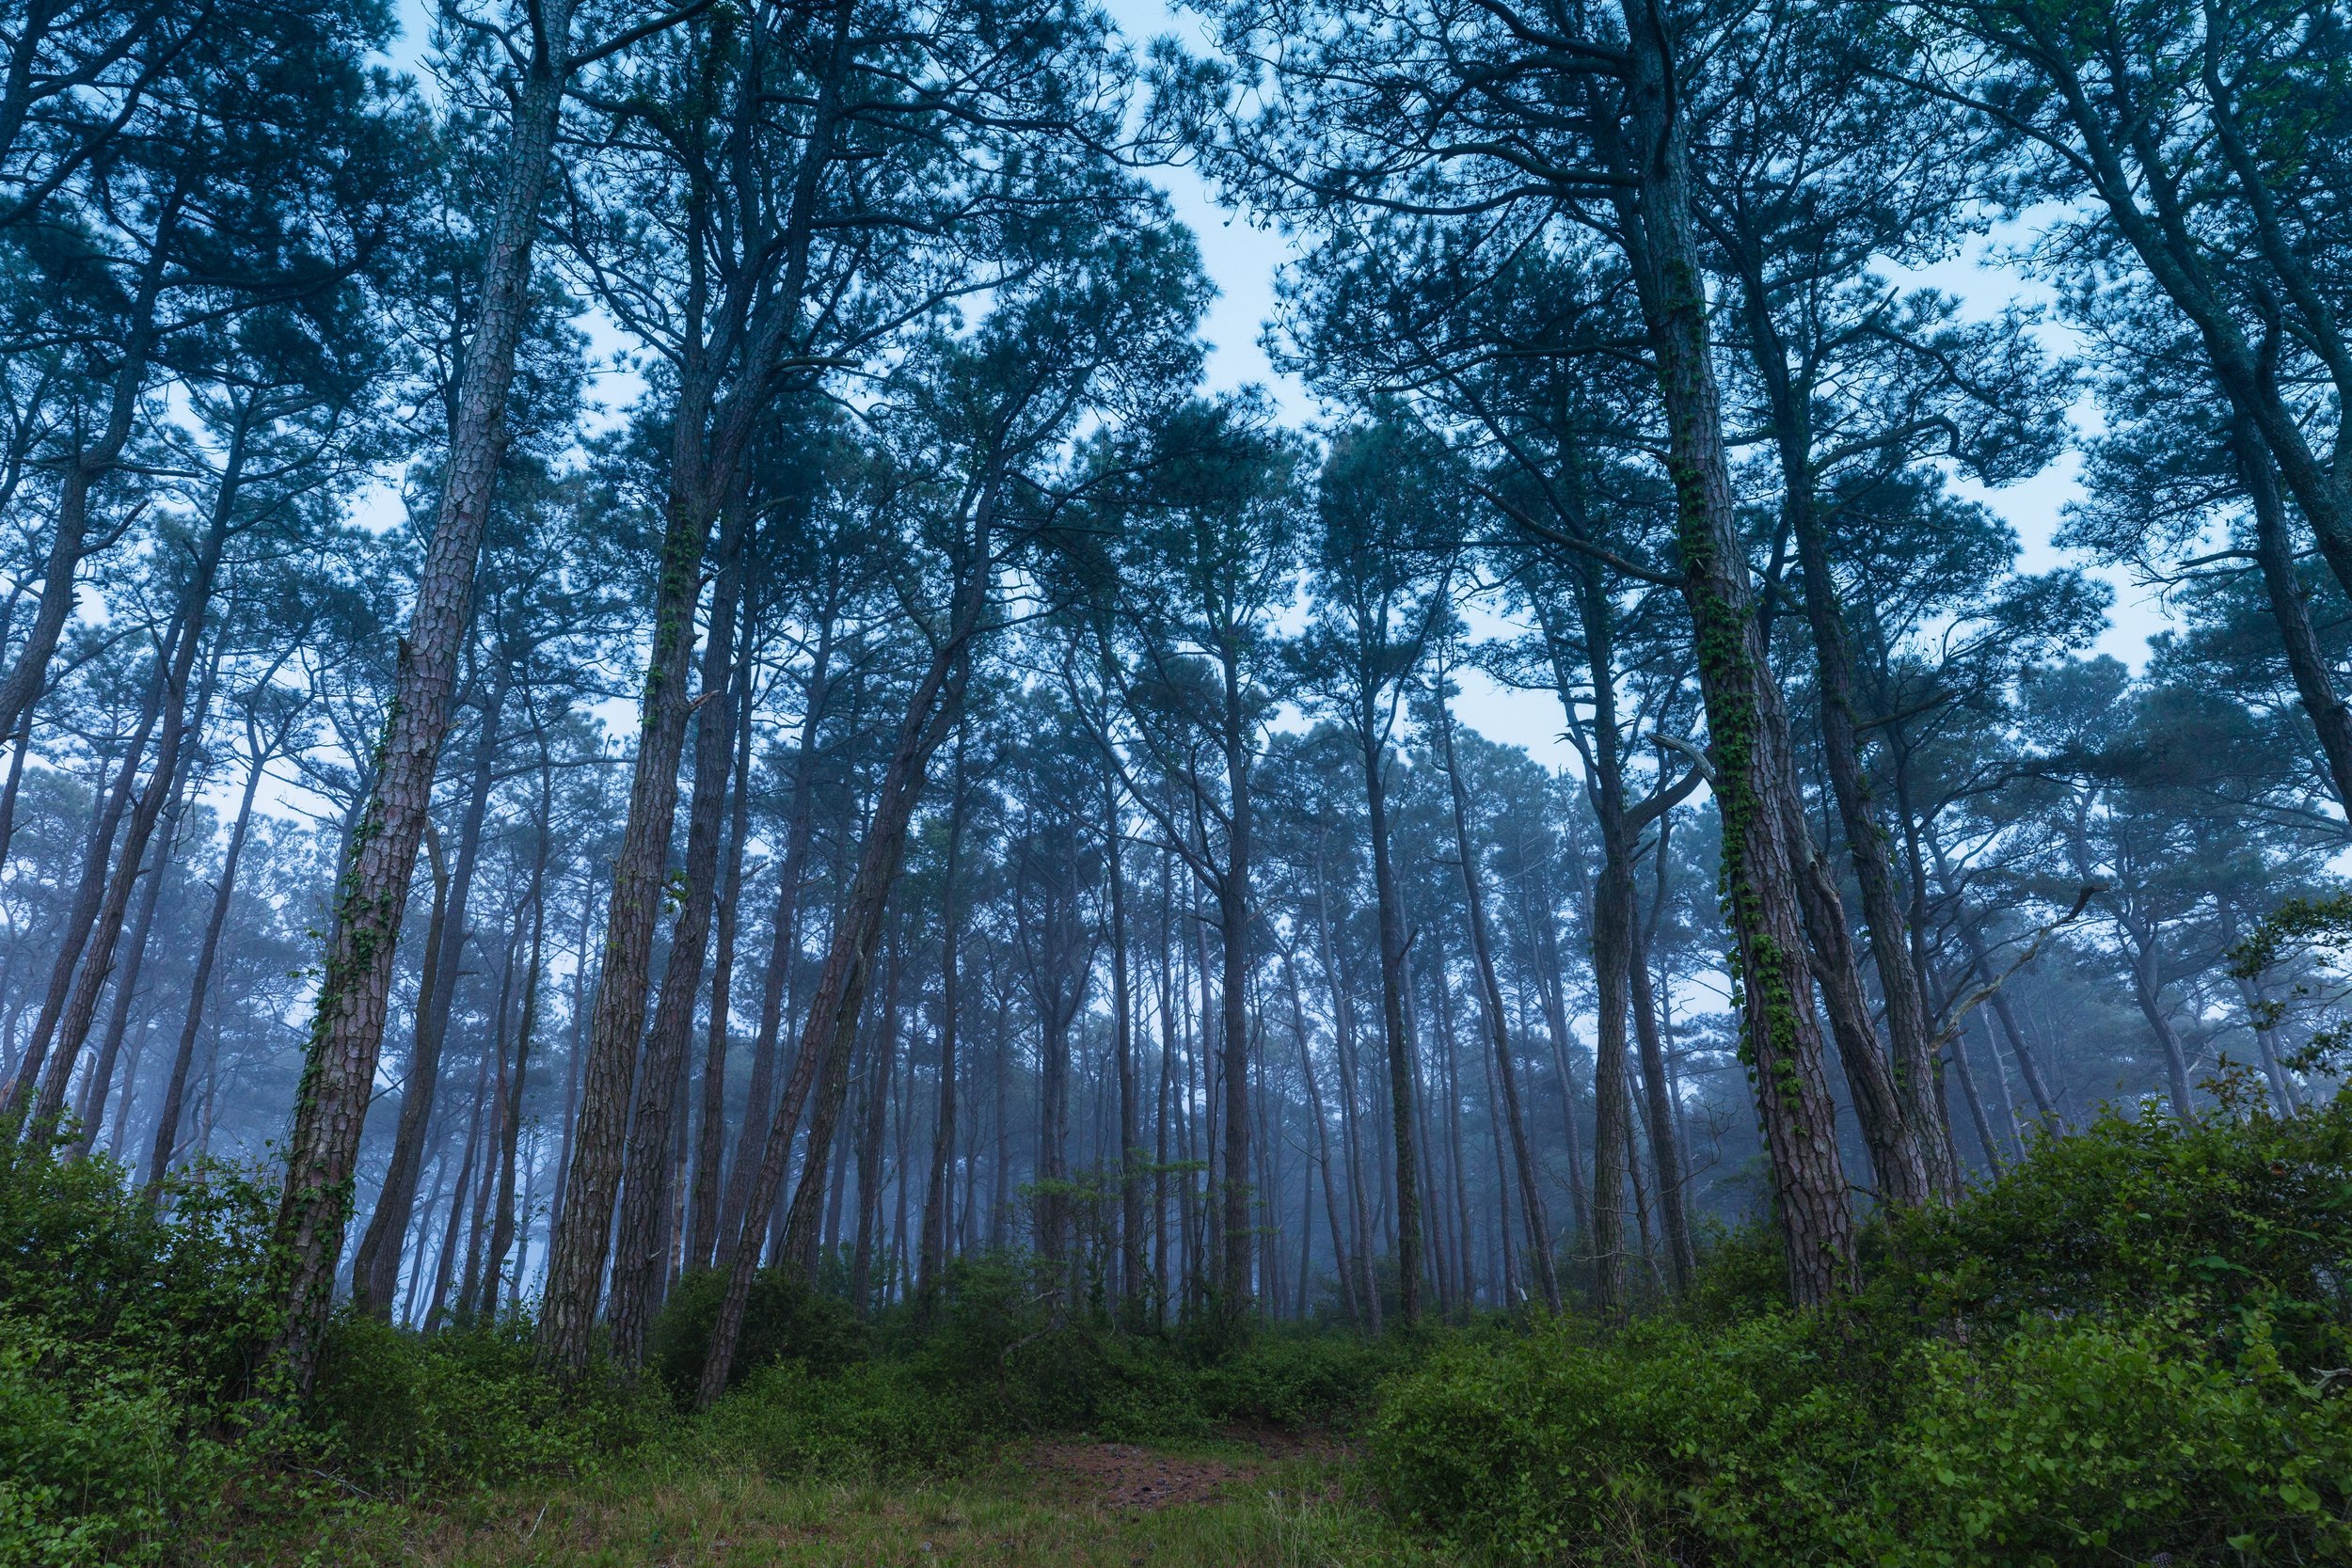 Pines And Fog At Twilight. Assateague N.S. (May 2019)